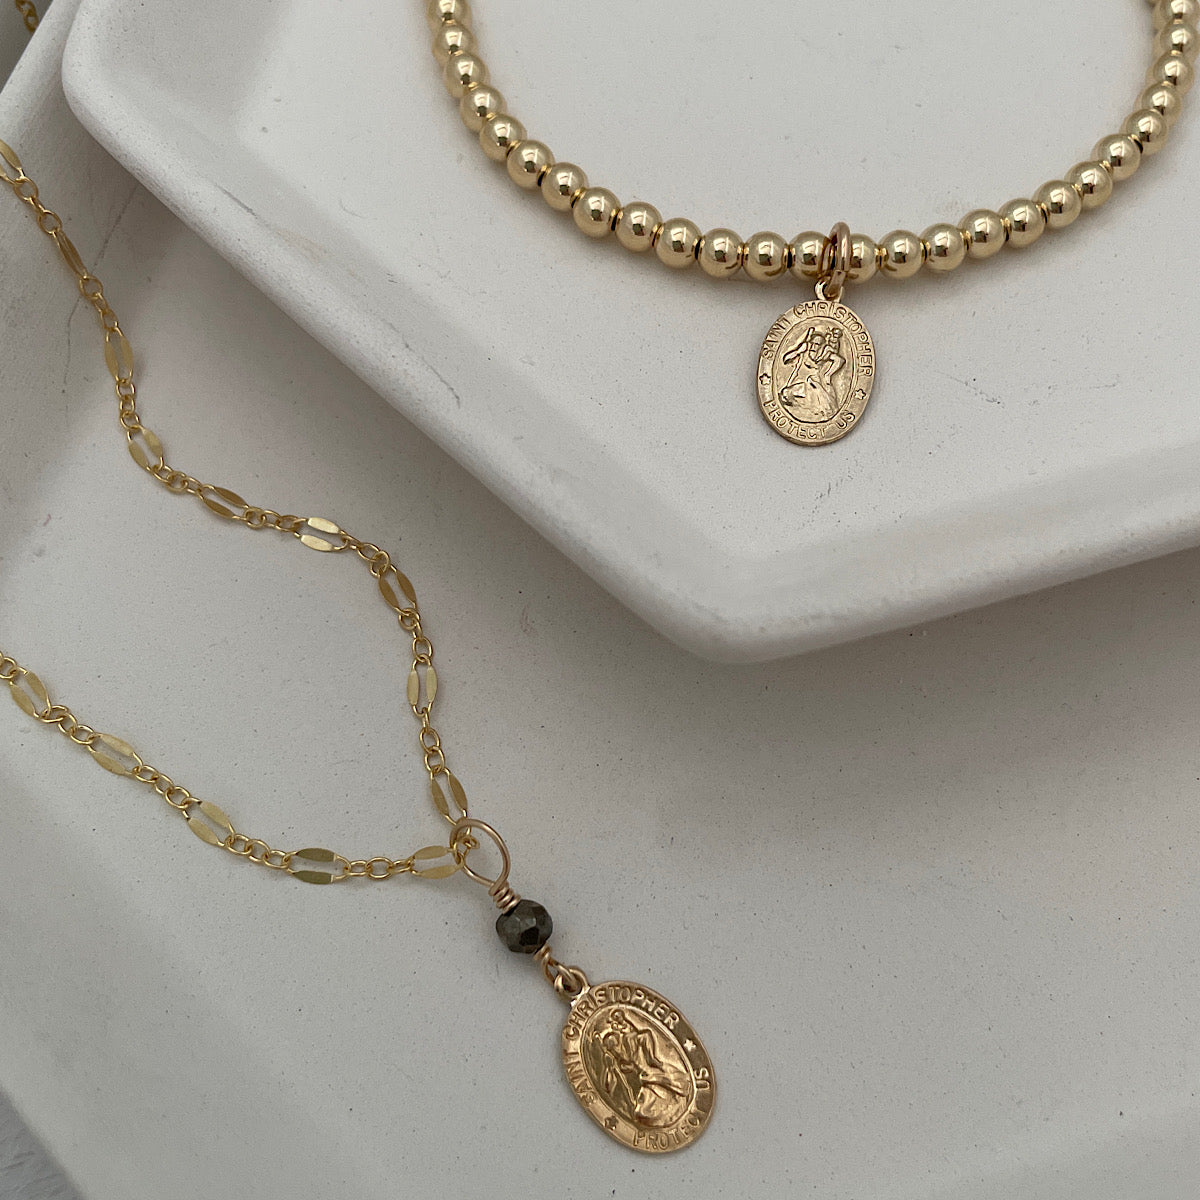 St Christopher Travelers Dainty Necklace